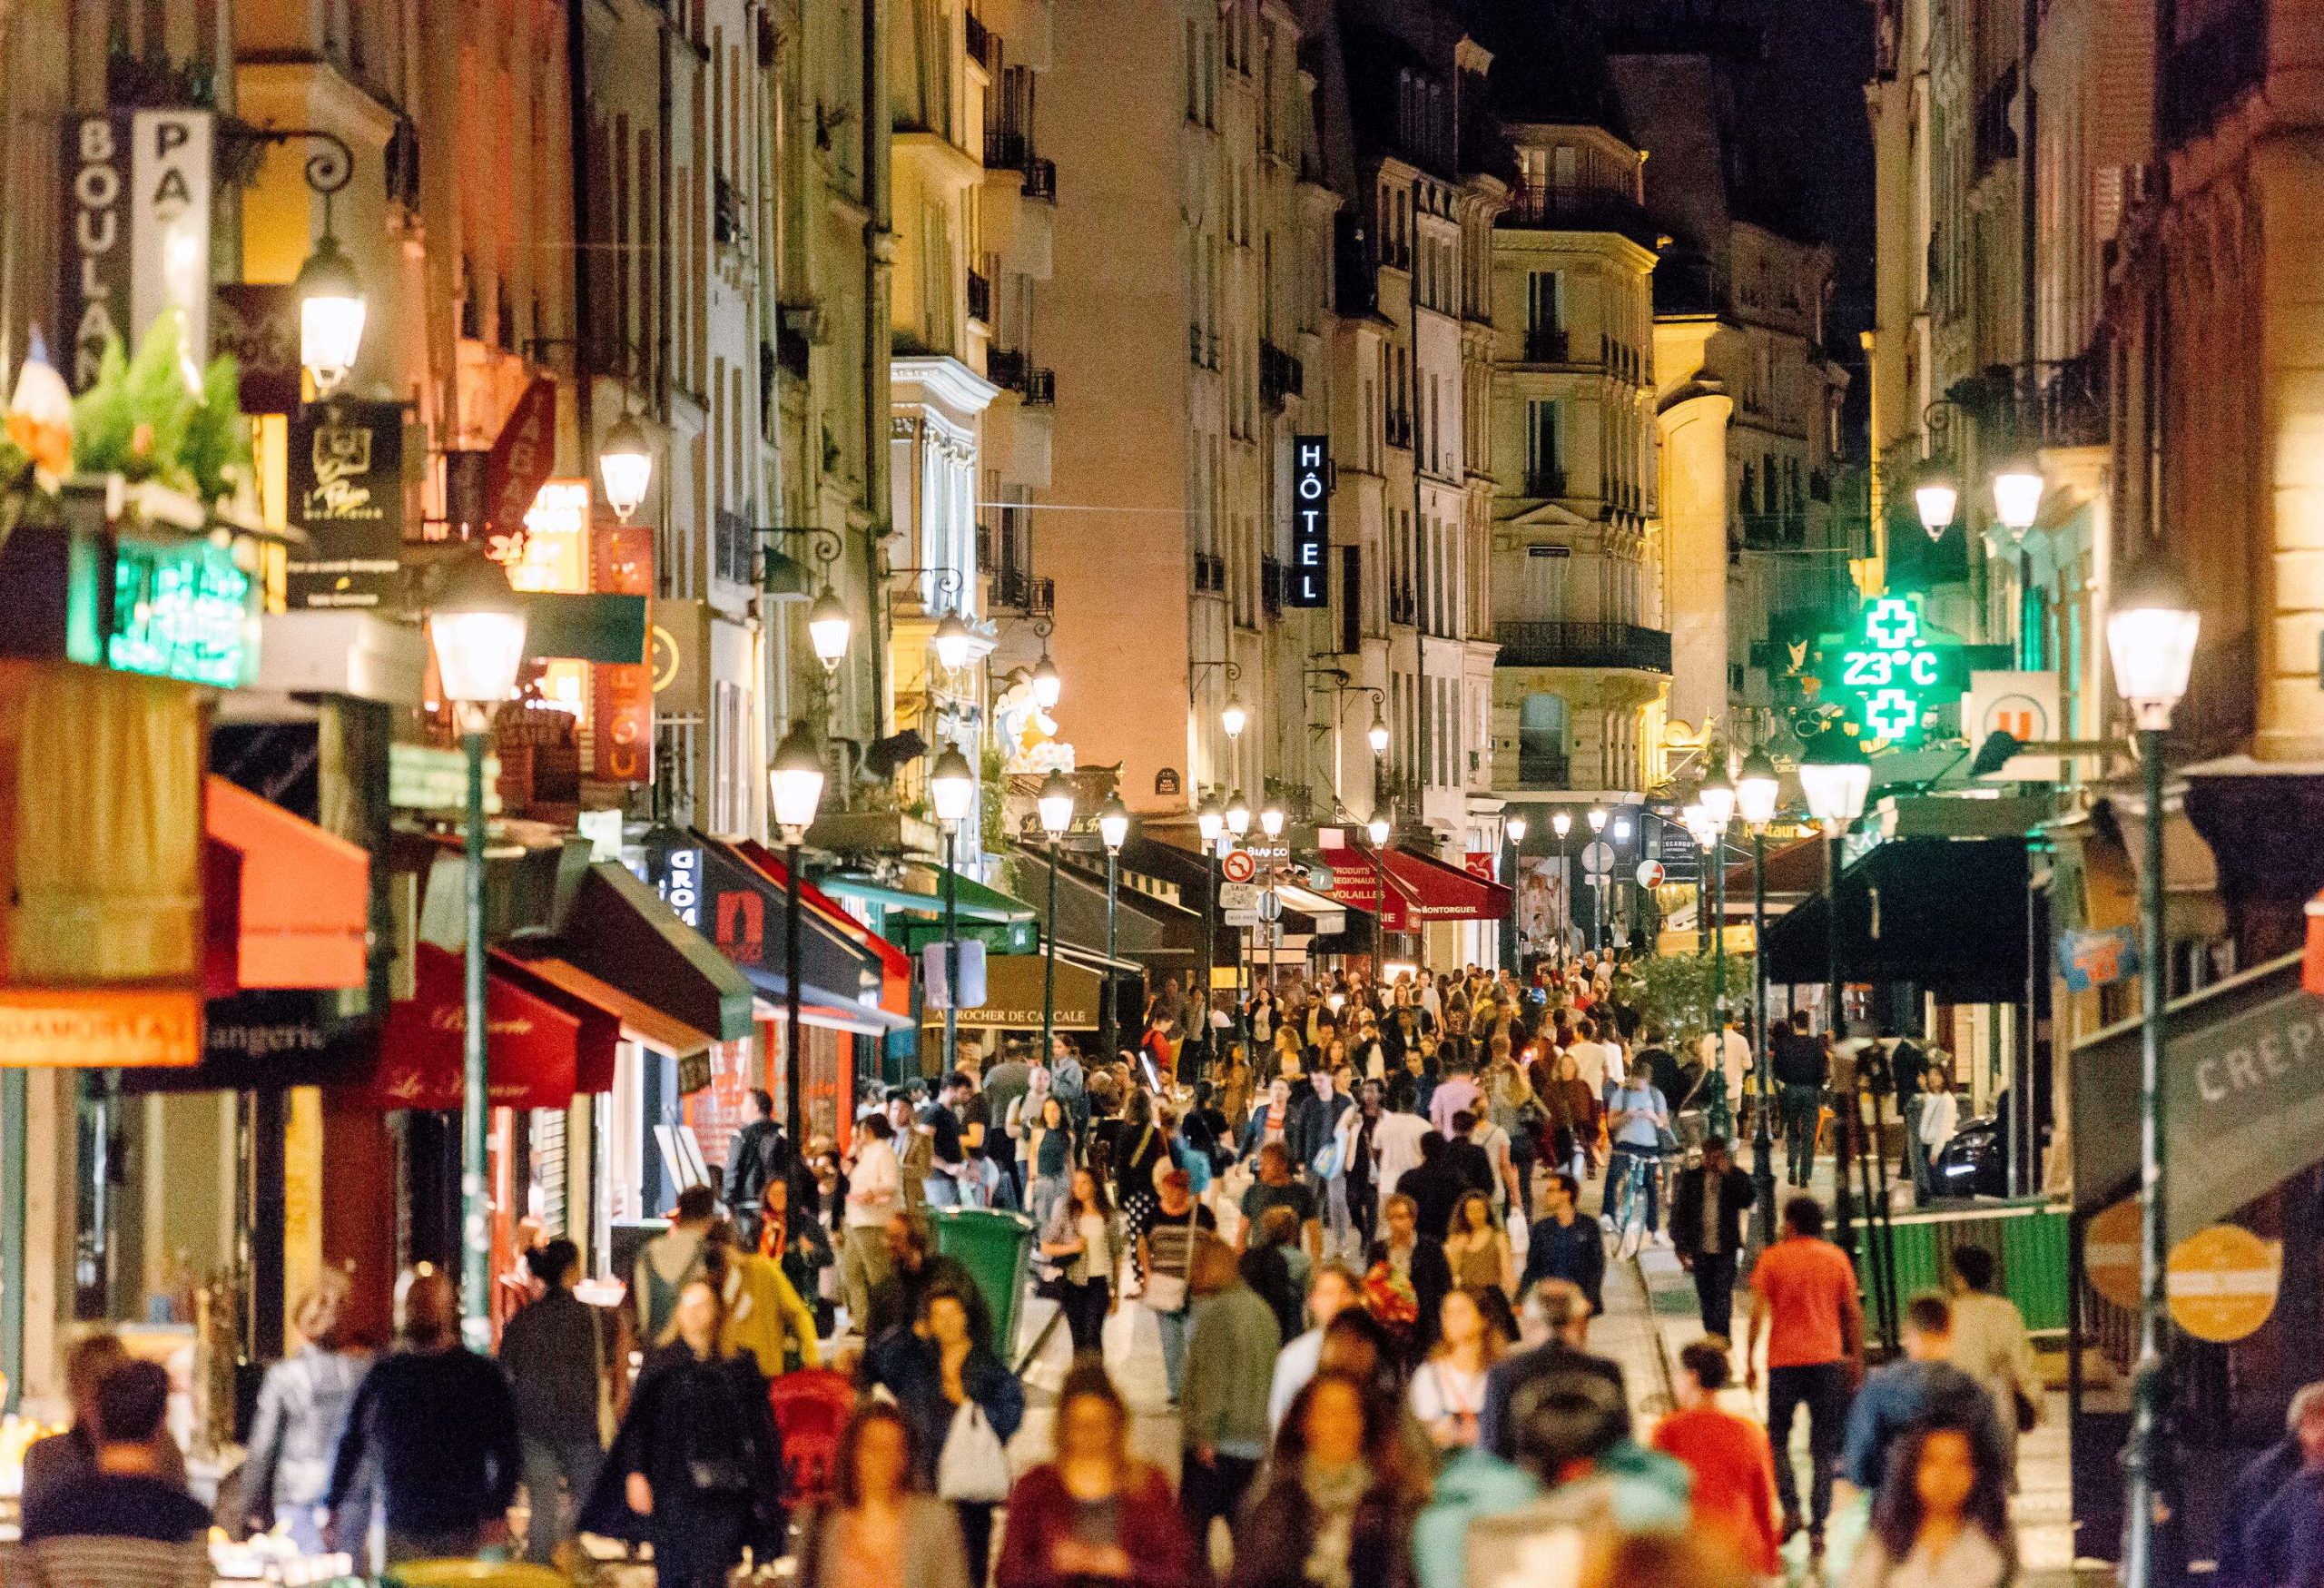 A night-time scene of a crowded street lined with lit street lamps, stores, and restaurants.